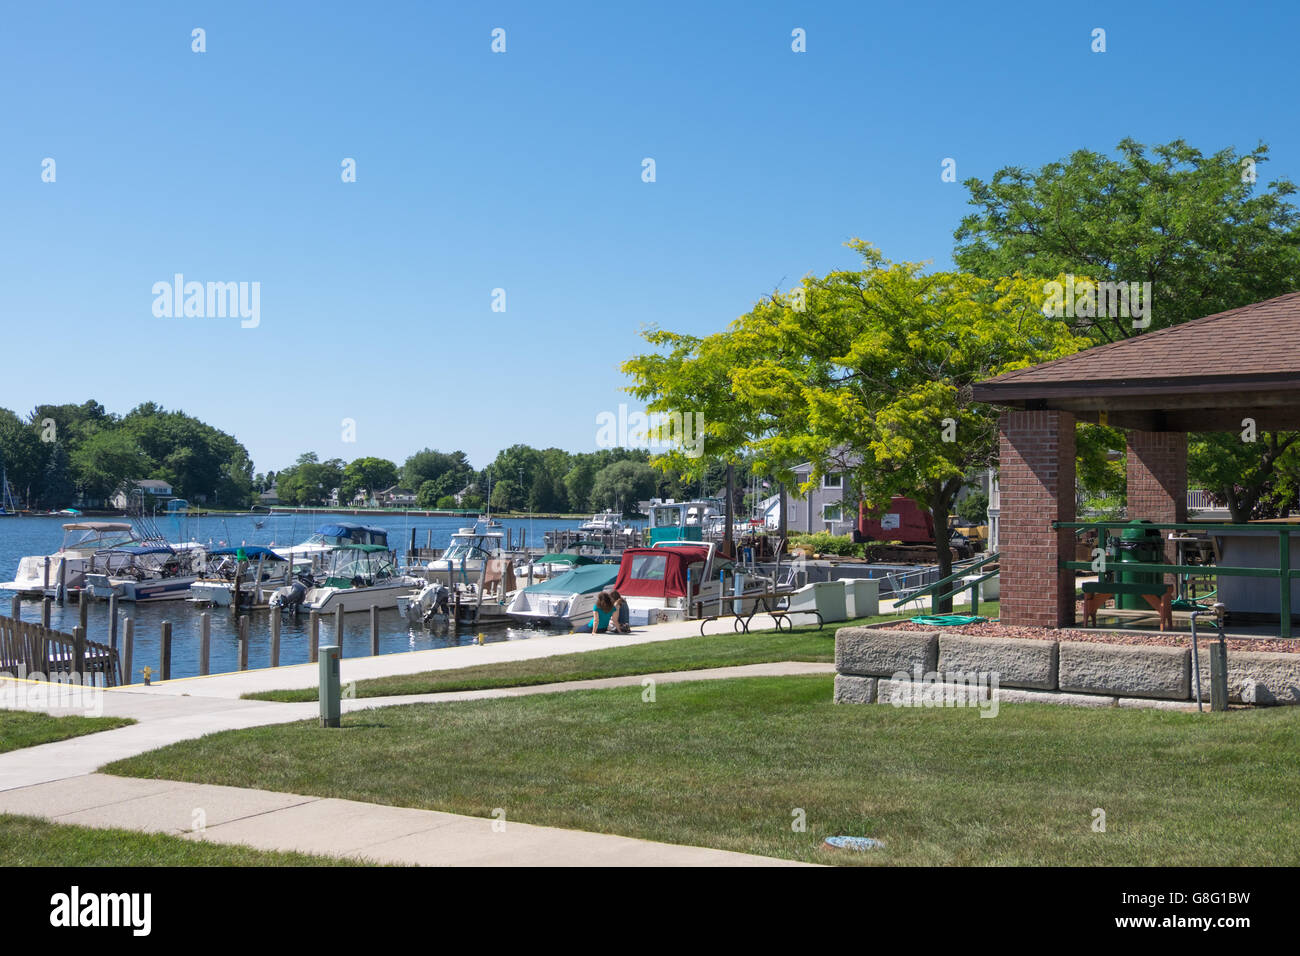 Public marina and park in downtown Pentwater, Michigan, USA on a bright ...